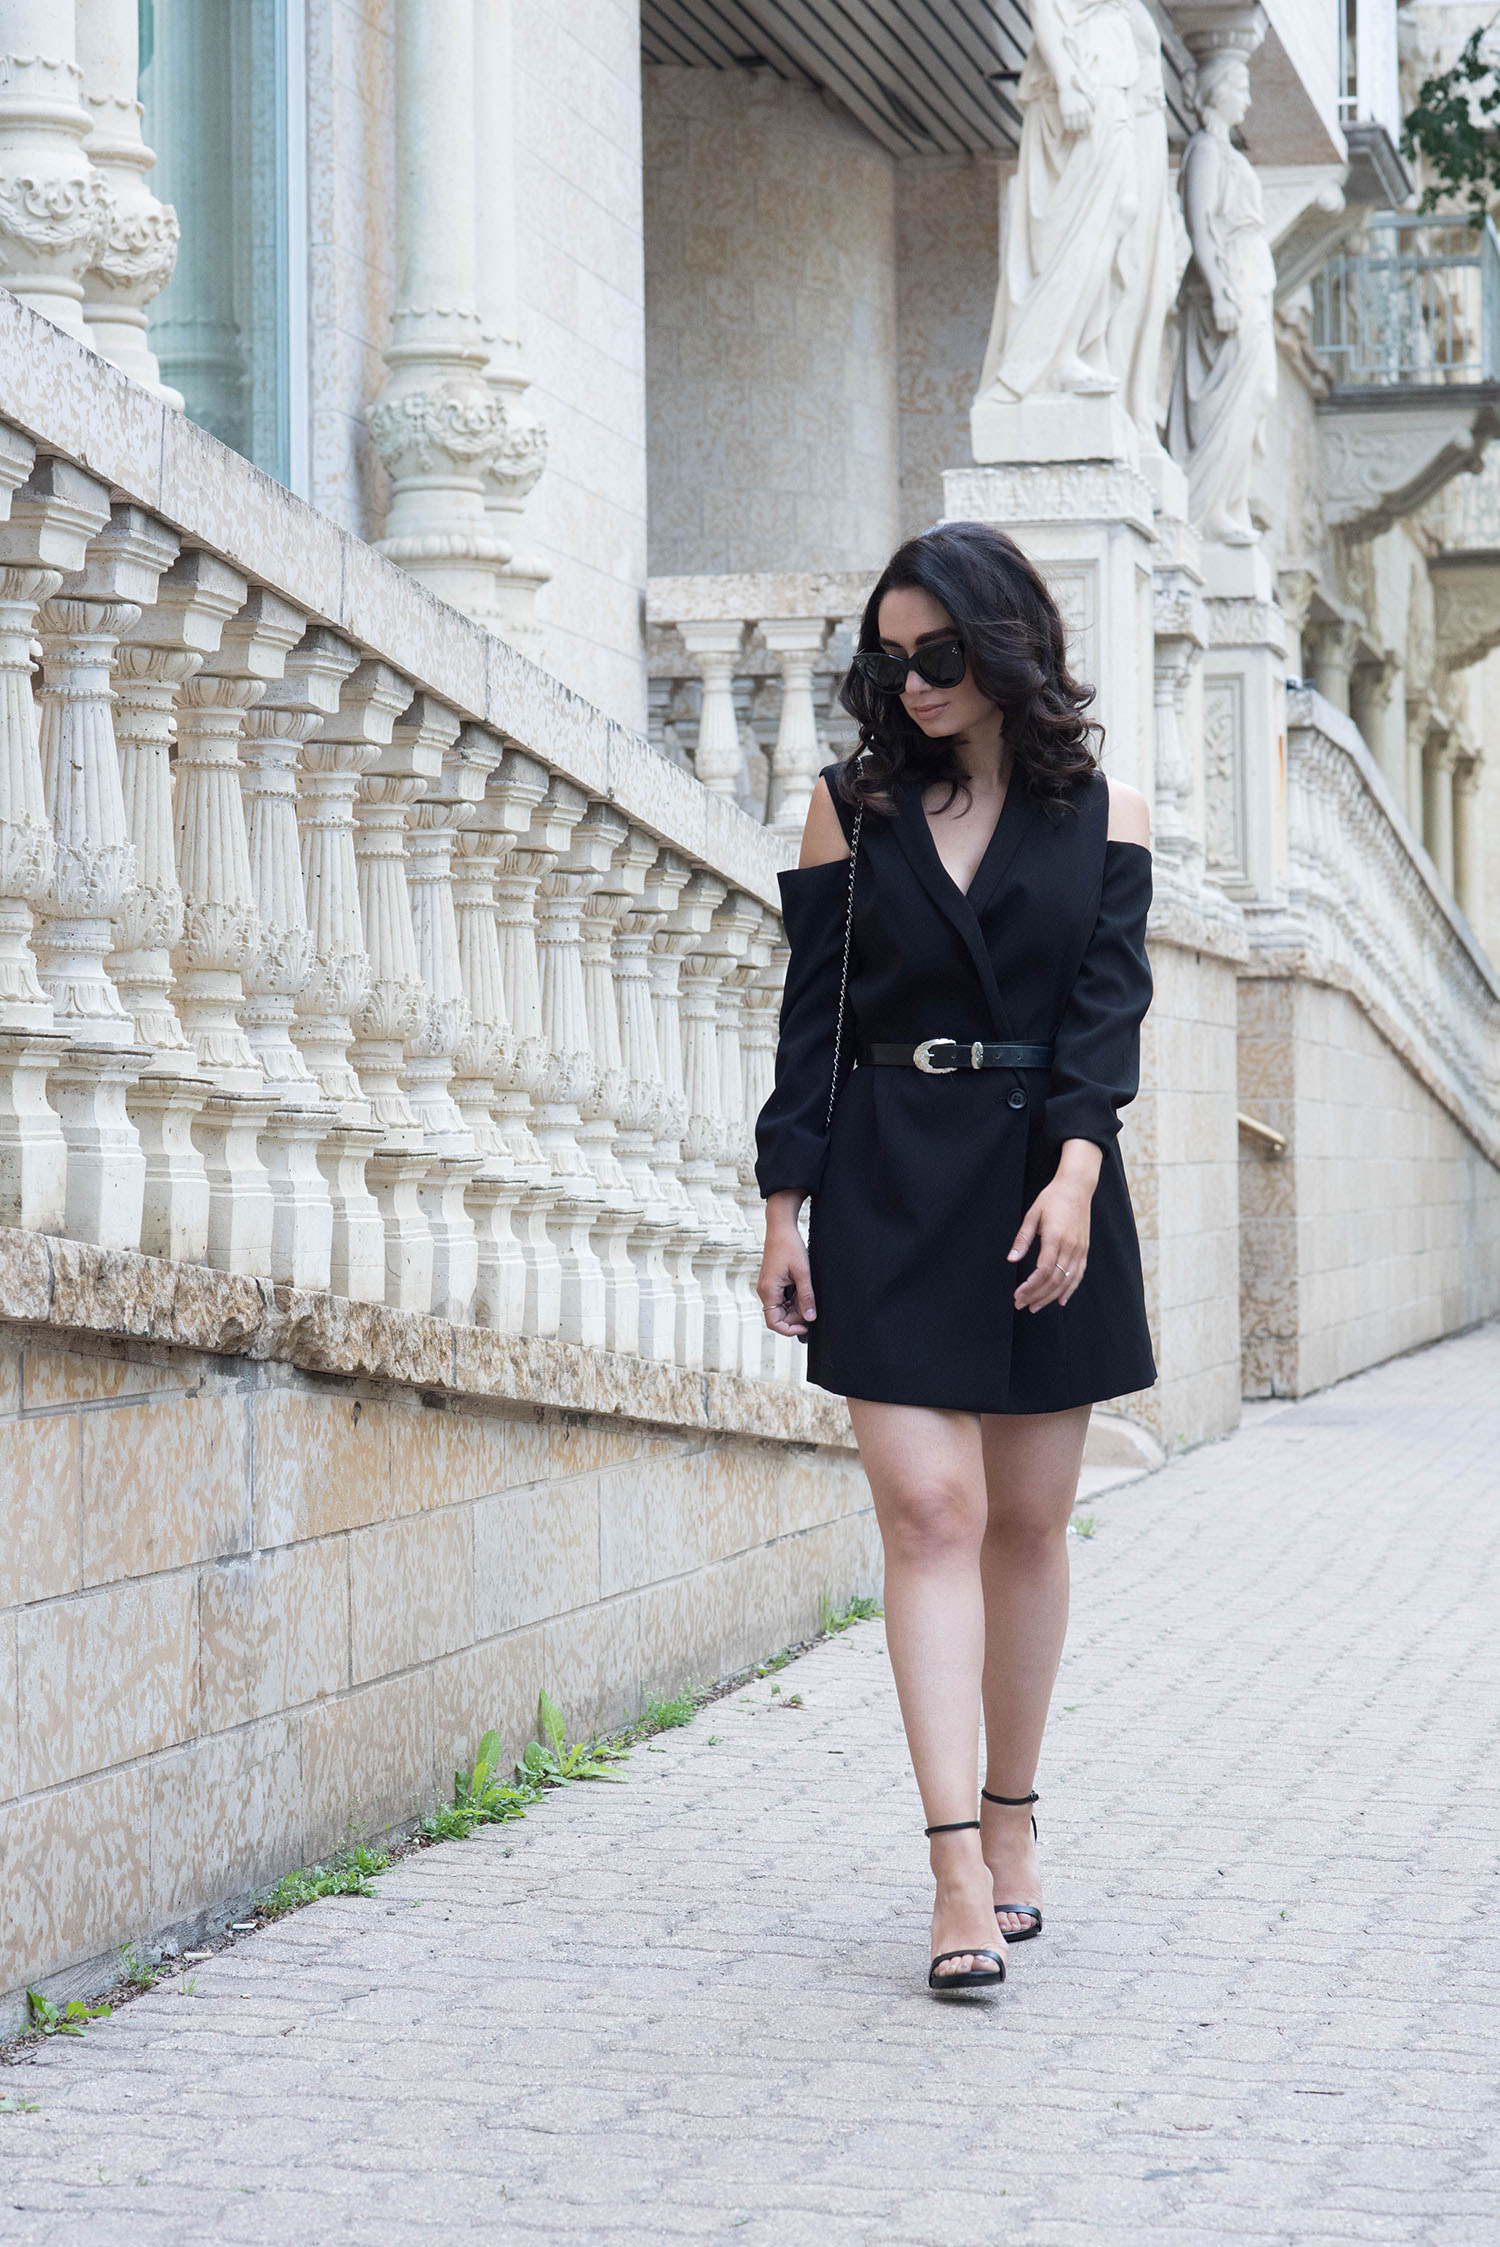 Fashion blogger Cee Fardoe of Coco & Vera walks past Fort Garry Place in Winnipeg wearing an Ever New dress, Steve Madden sandals and vintage belt